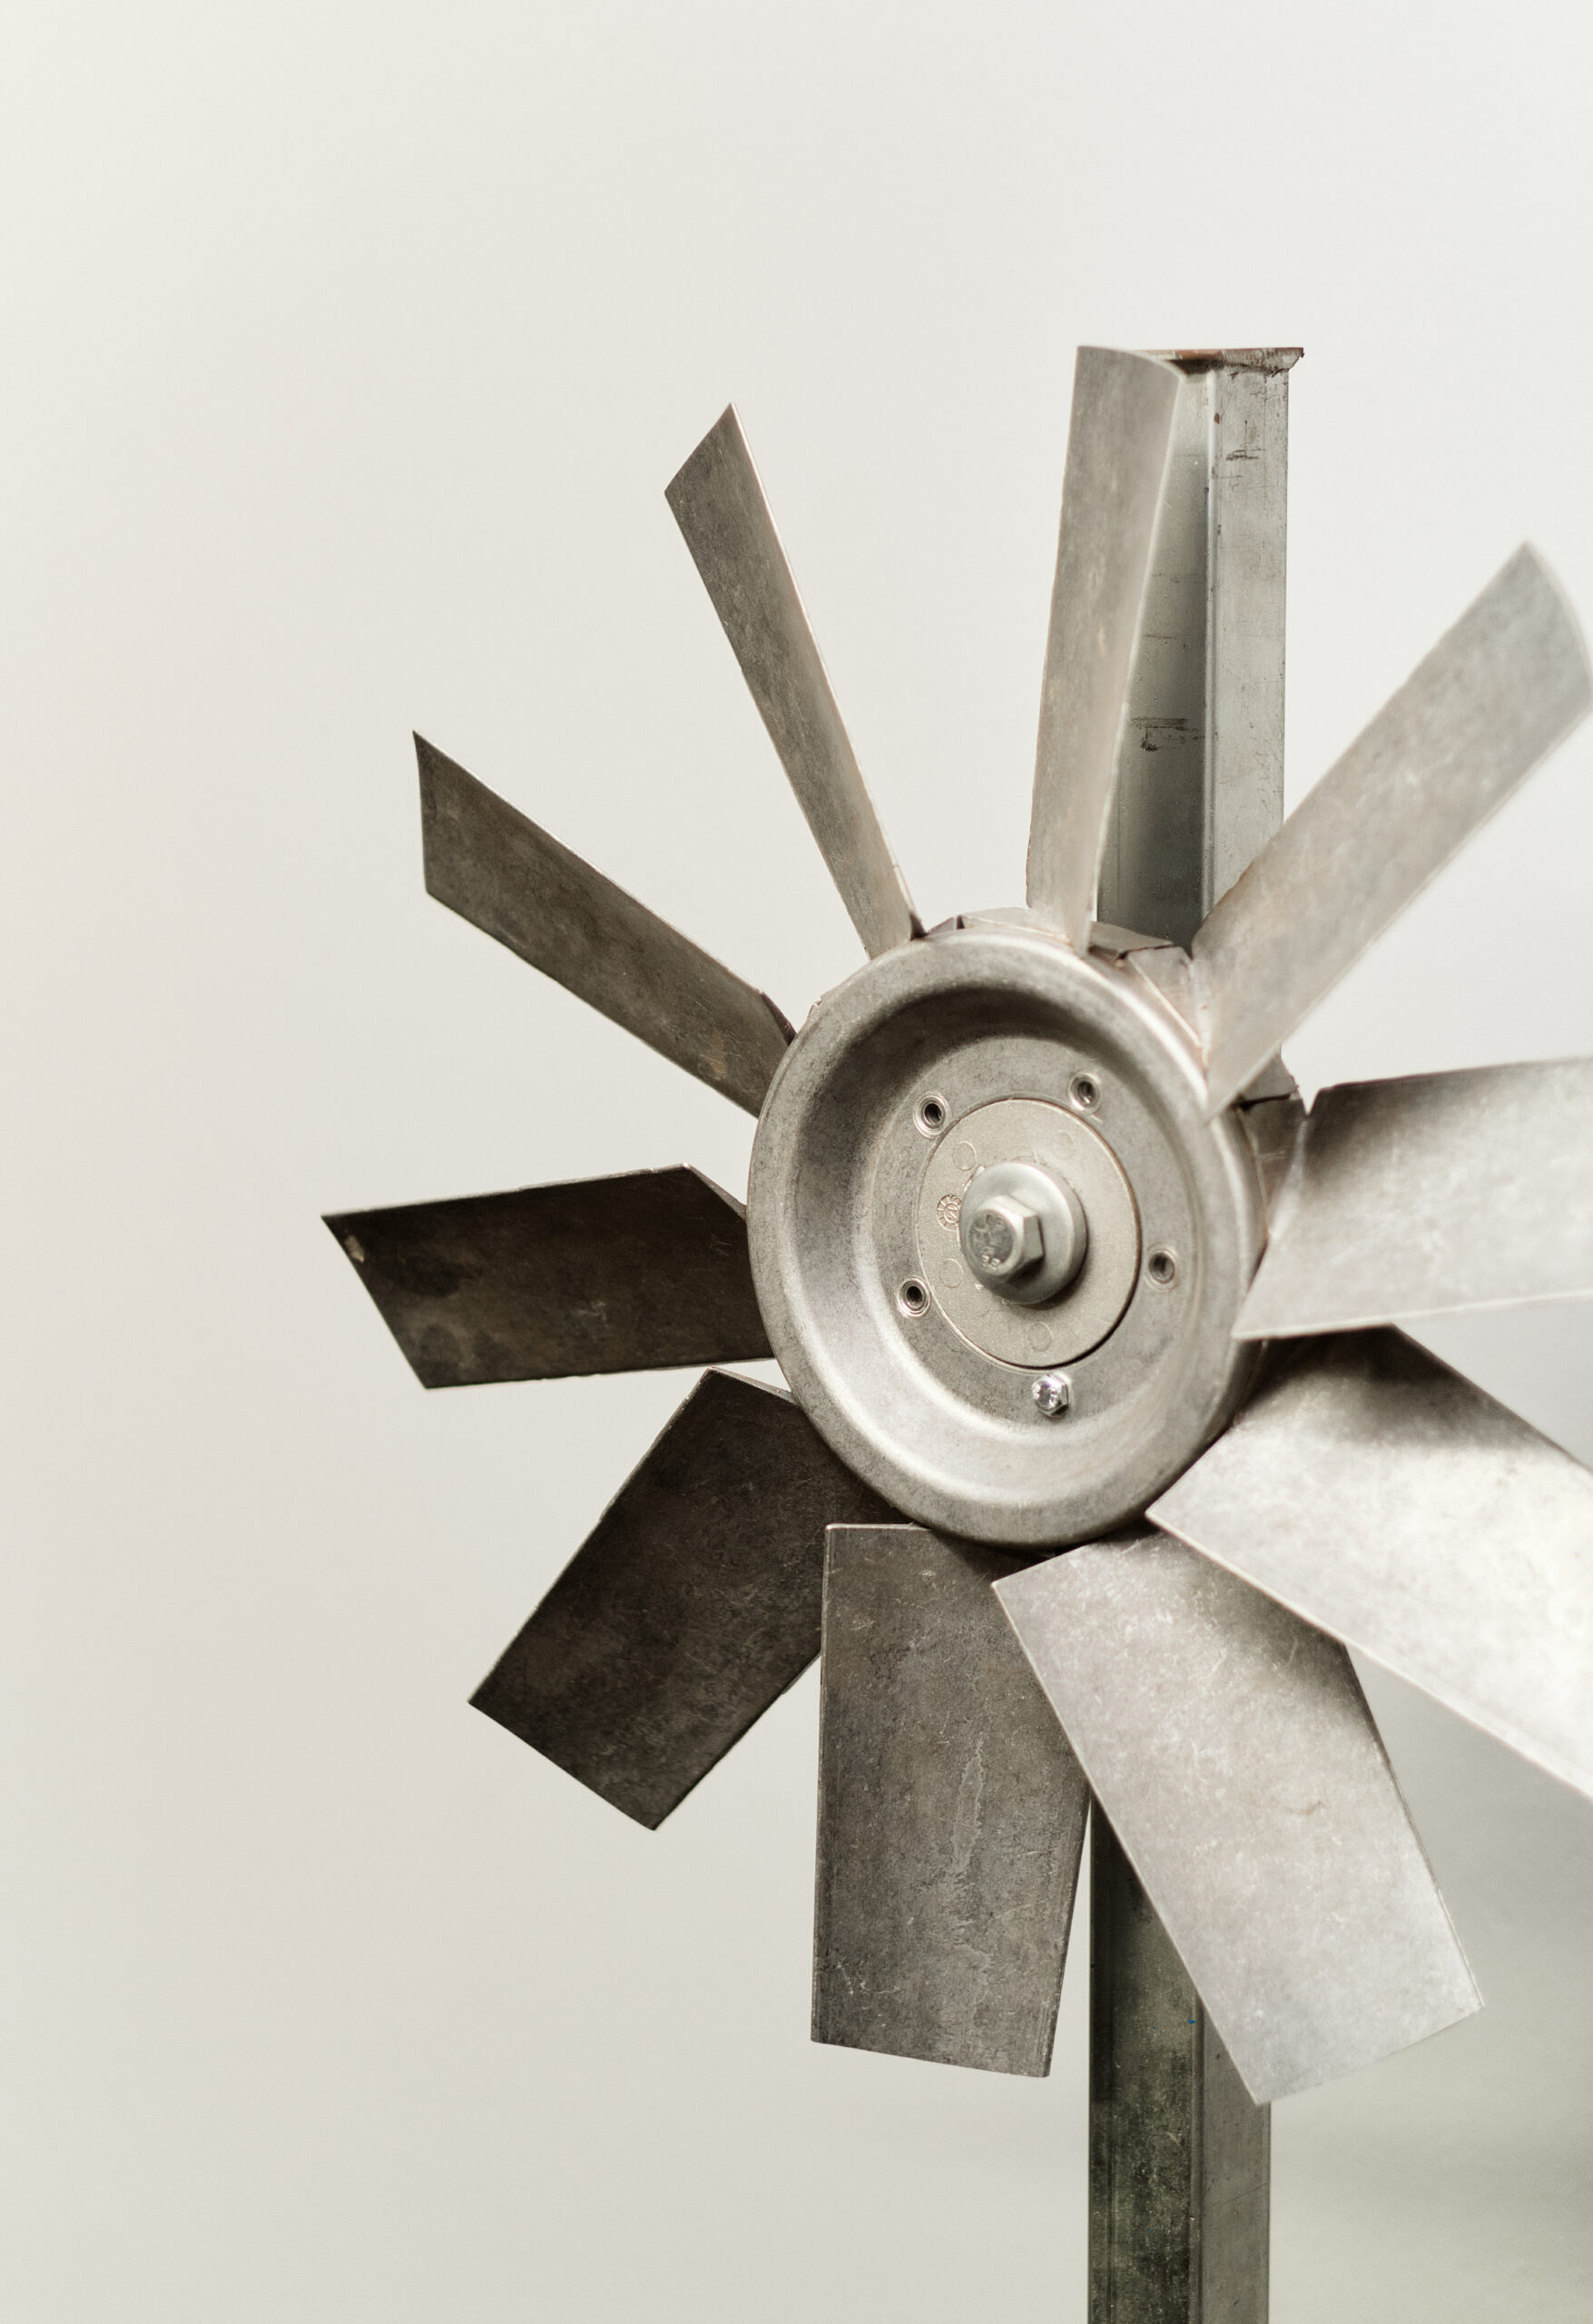 OEM Replacesments and Custom Impellers